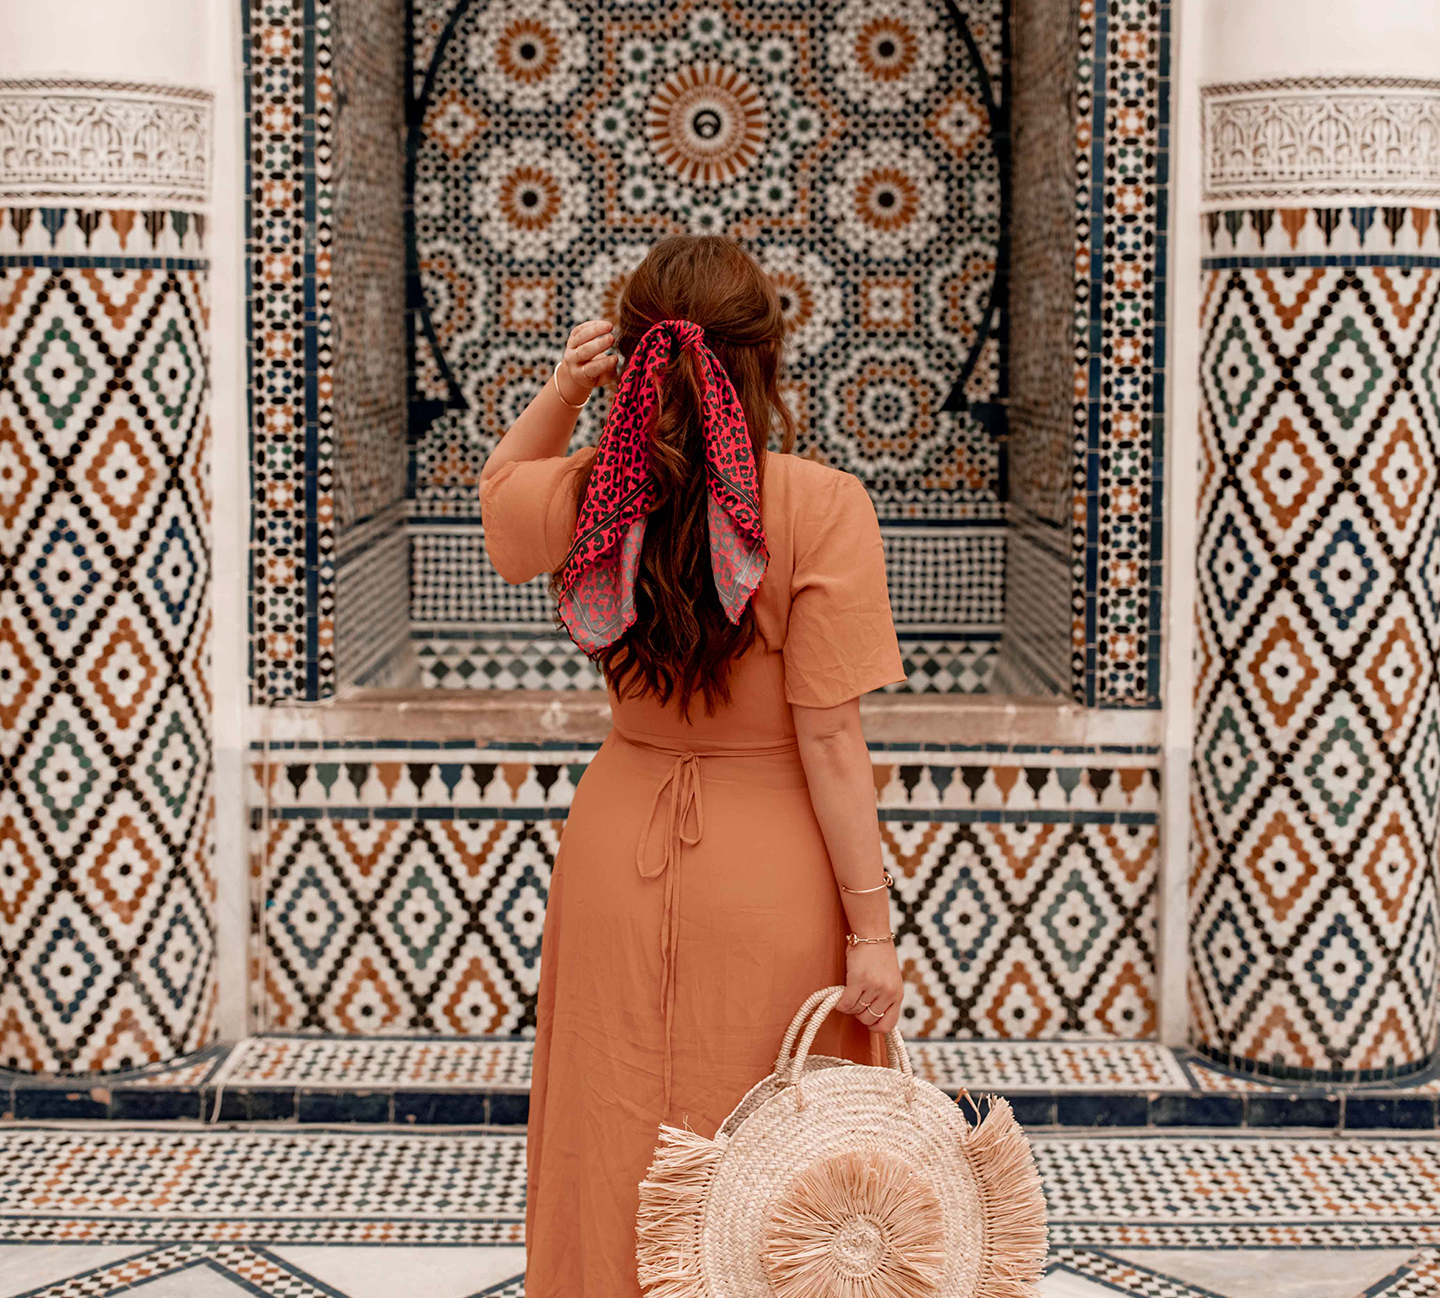 10 Top things to do in Marrakech